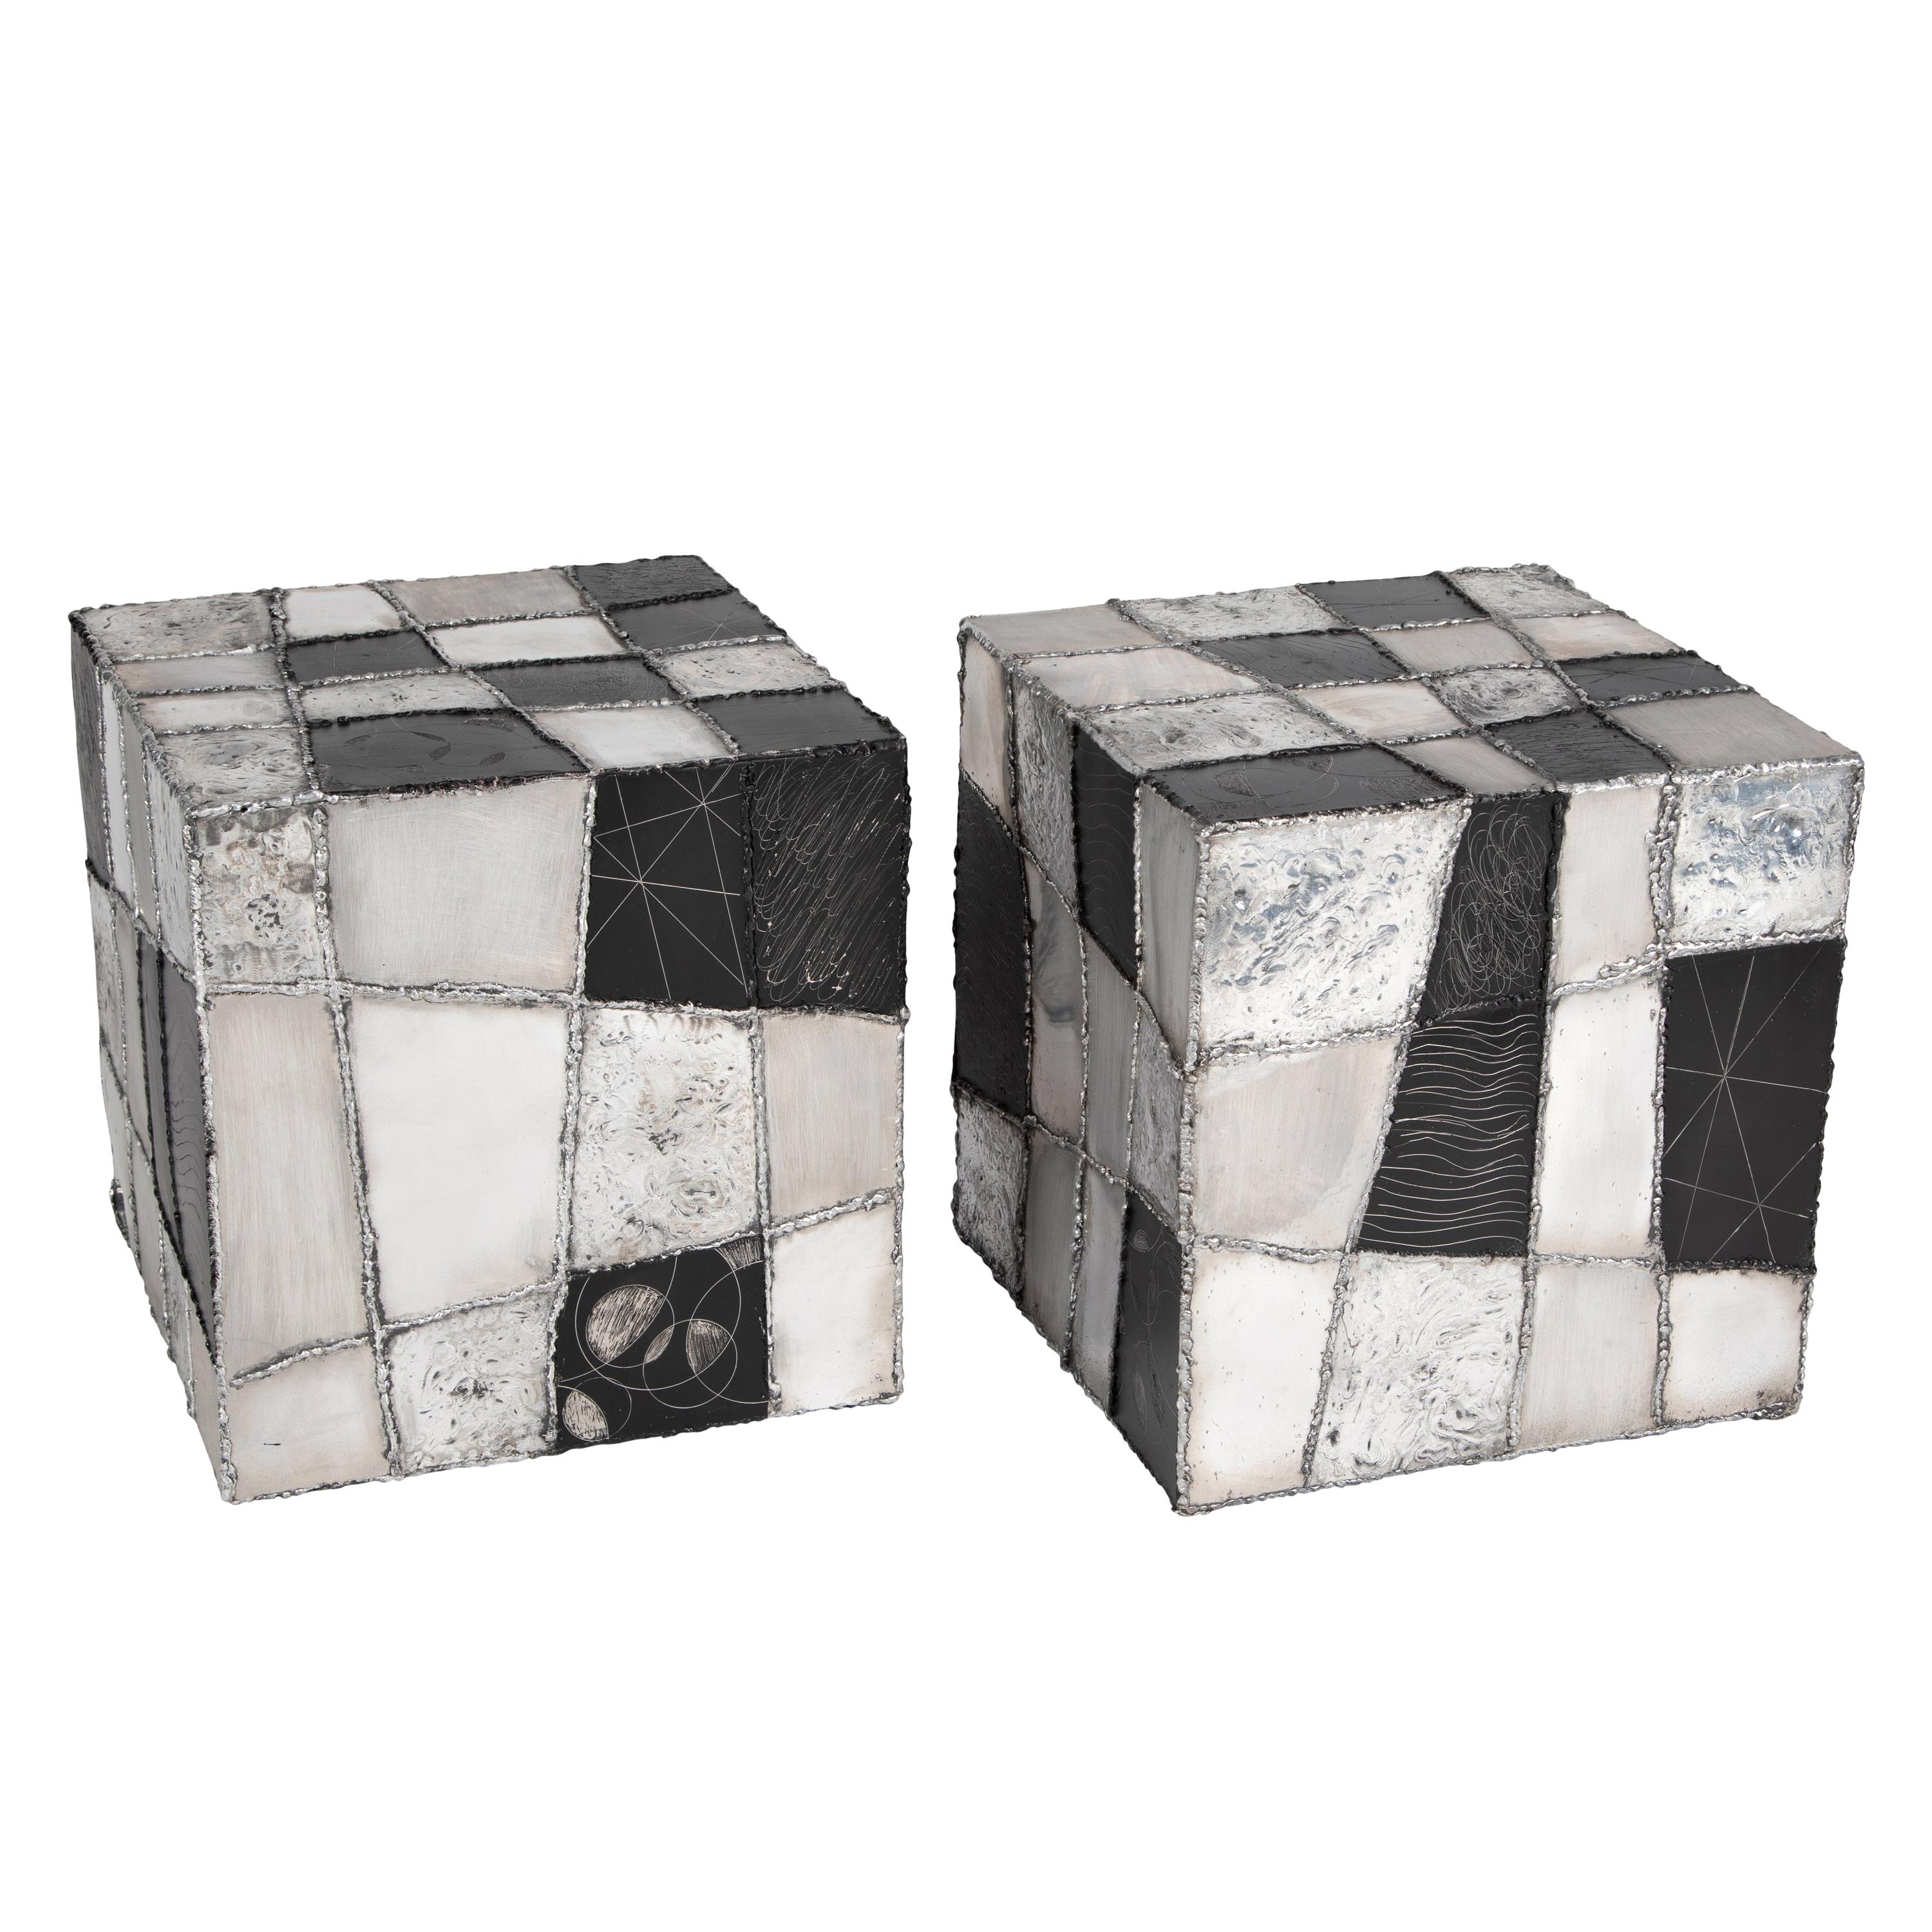 Rare Pair of Paul Evans "Argente" Side Tables, circa 1960s For Sale